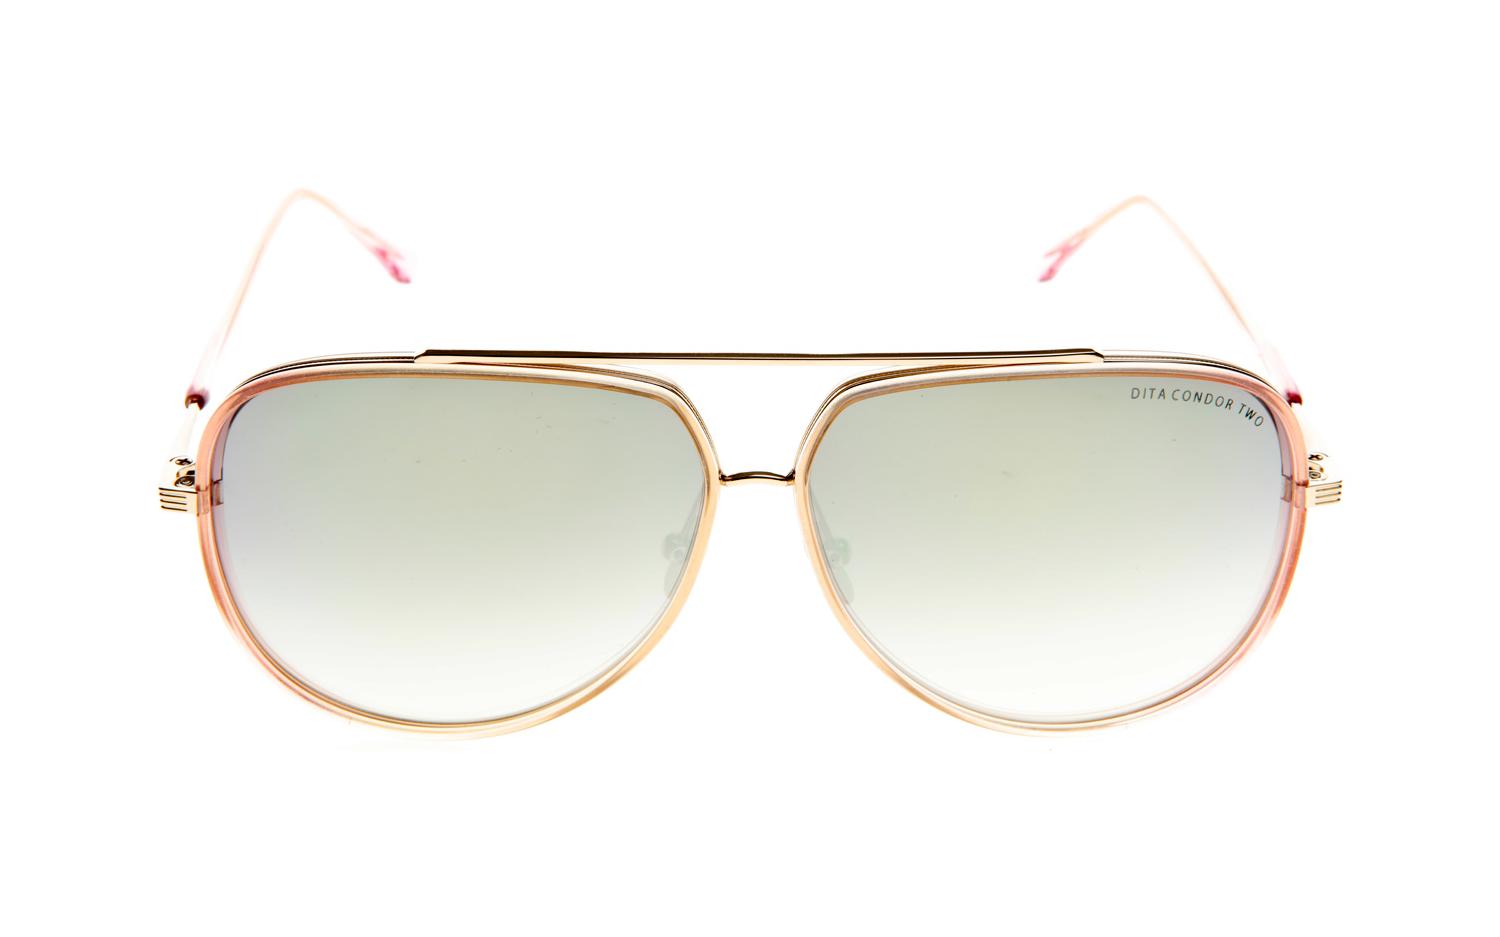 New Authentic DITA CONDOR-TWO Pink Pale Gold Silver Mirror Sunglasses 21010-D 